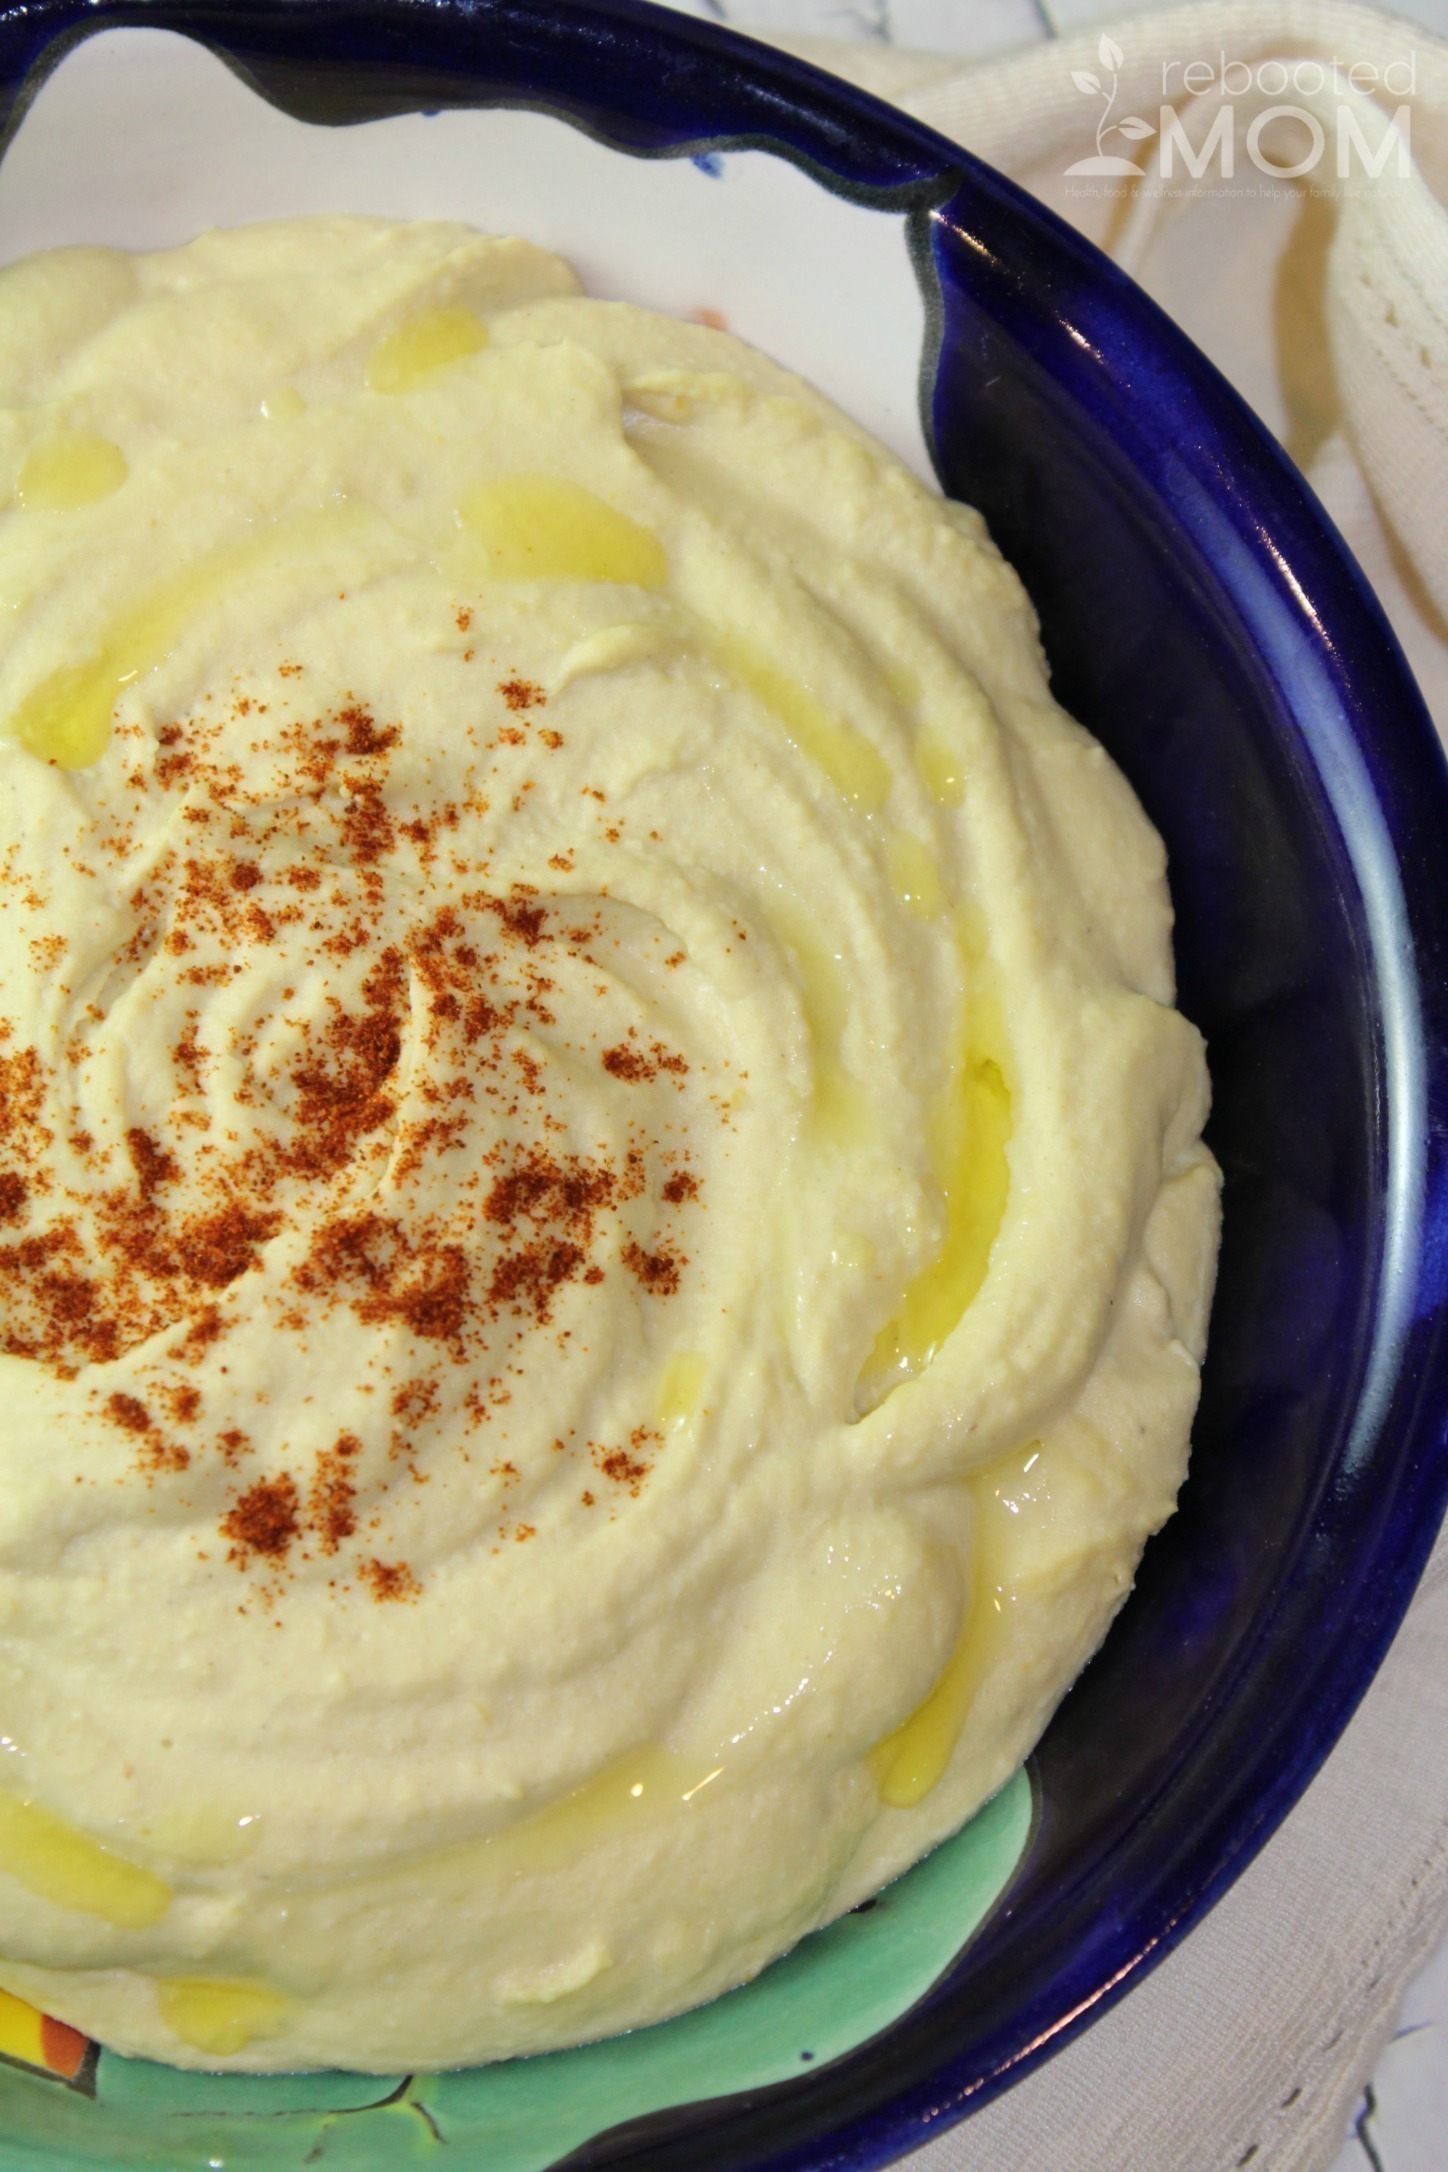 This hatch chile hummus takes traditional hummus up a notch with the flavor of these roasted hatch chiles.